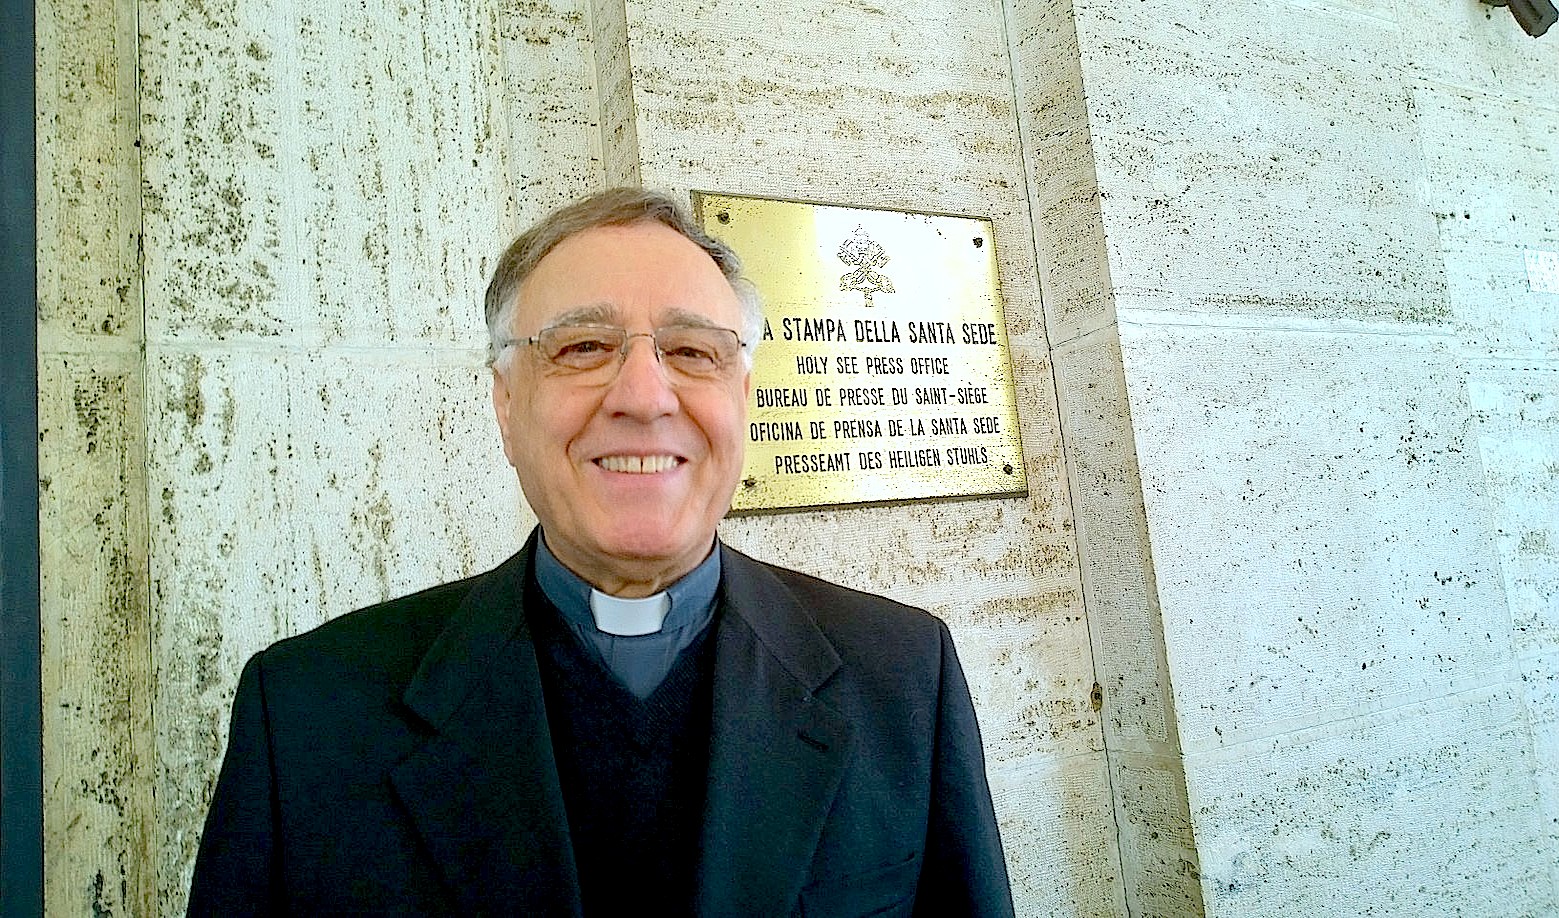 Father Ciro Benedettini deputy director of Holy See press office